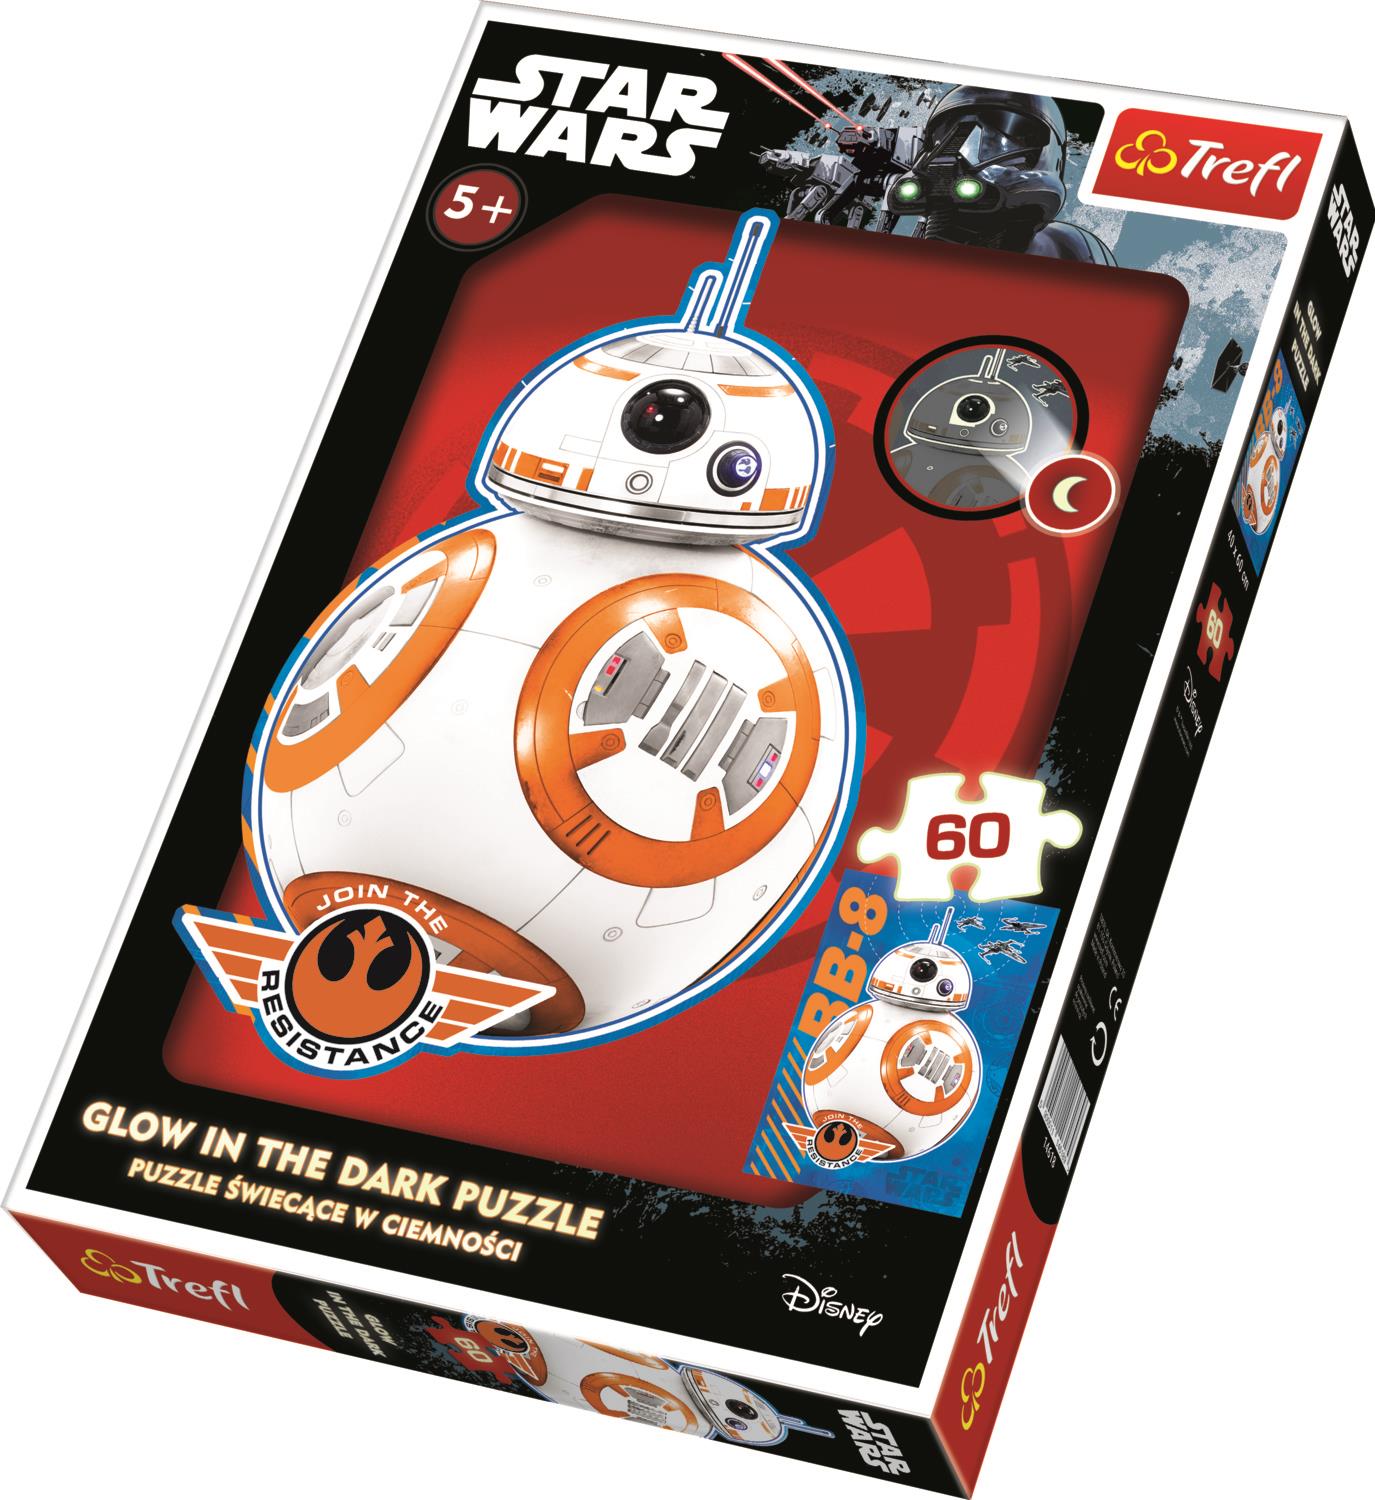 Trefl Çocuk Puzzle 14618 Star Wars Episode VII: Force Awakens, Join The Resistance 60 Parça Glow In The Dark Puzzle